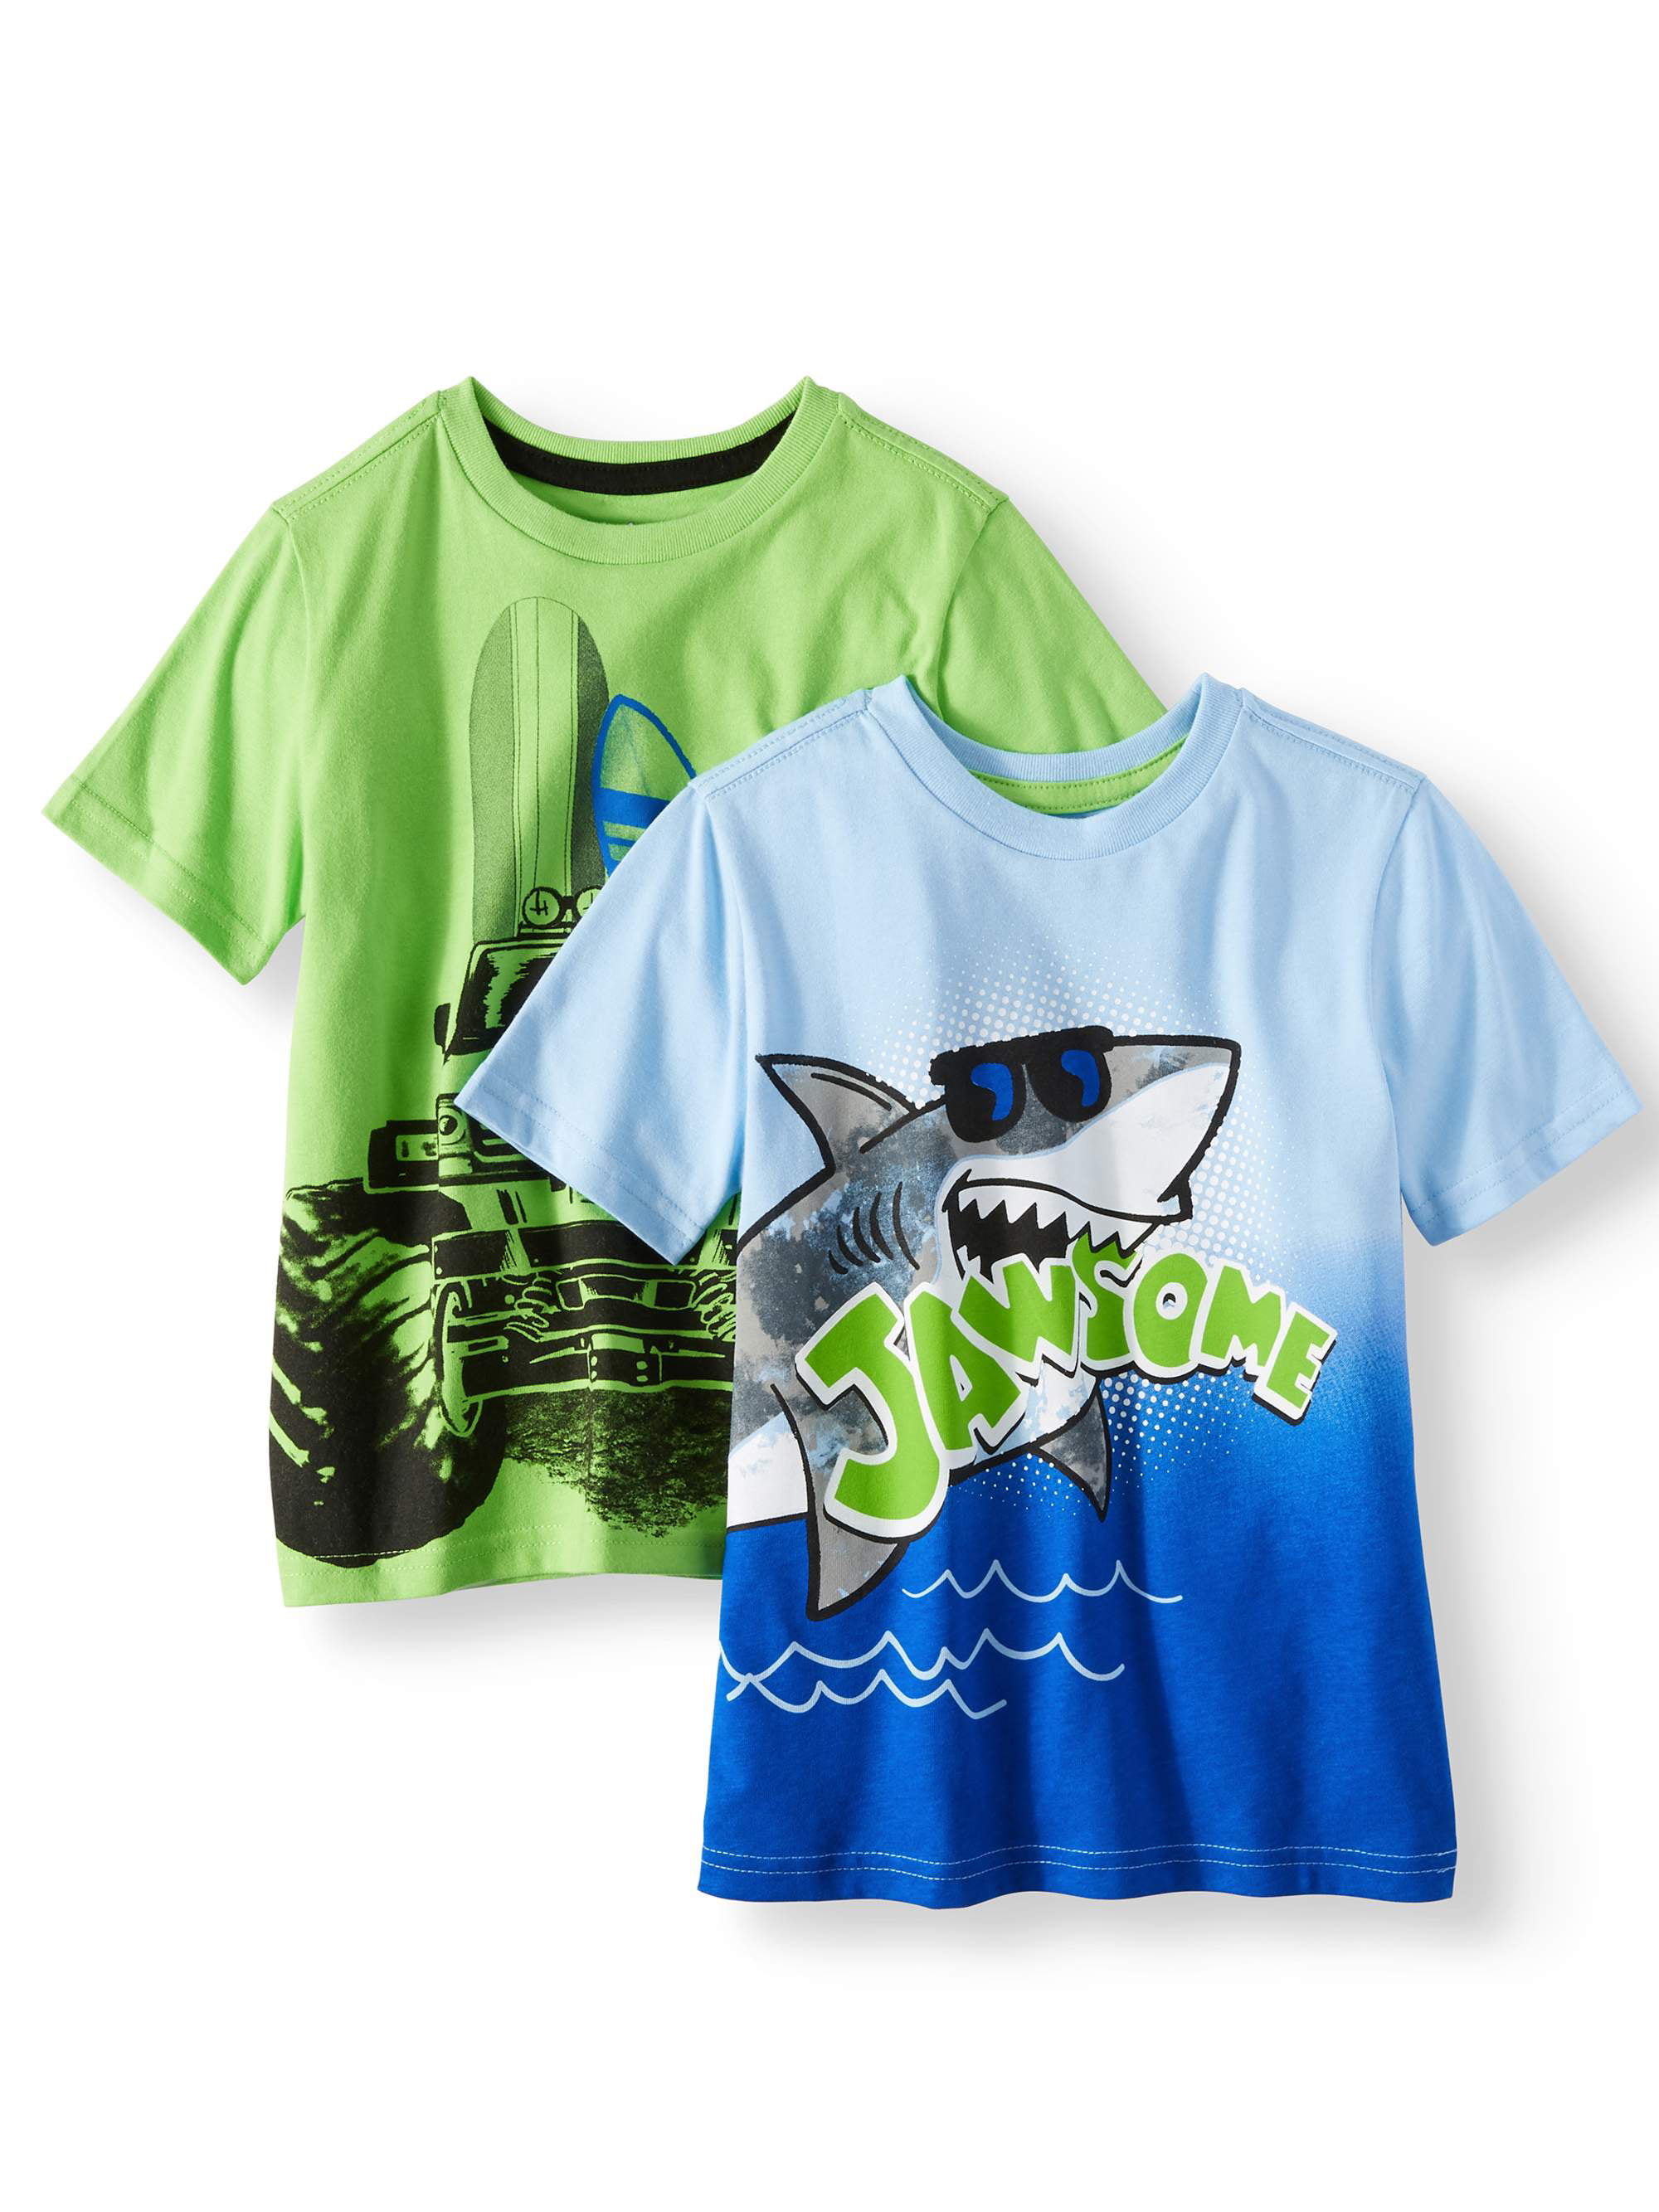 Onlybabycare Noodle Sea 100% Cotton Toddler Baby Boys Girls Kids Short Sleeve T Shirt Top Tee Clothes 2-6 T